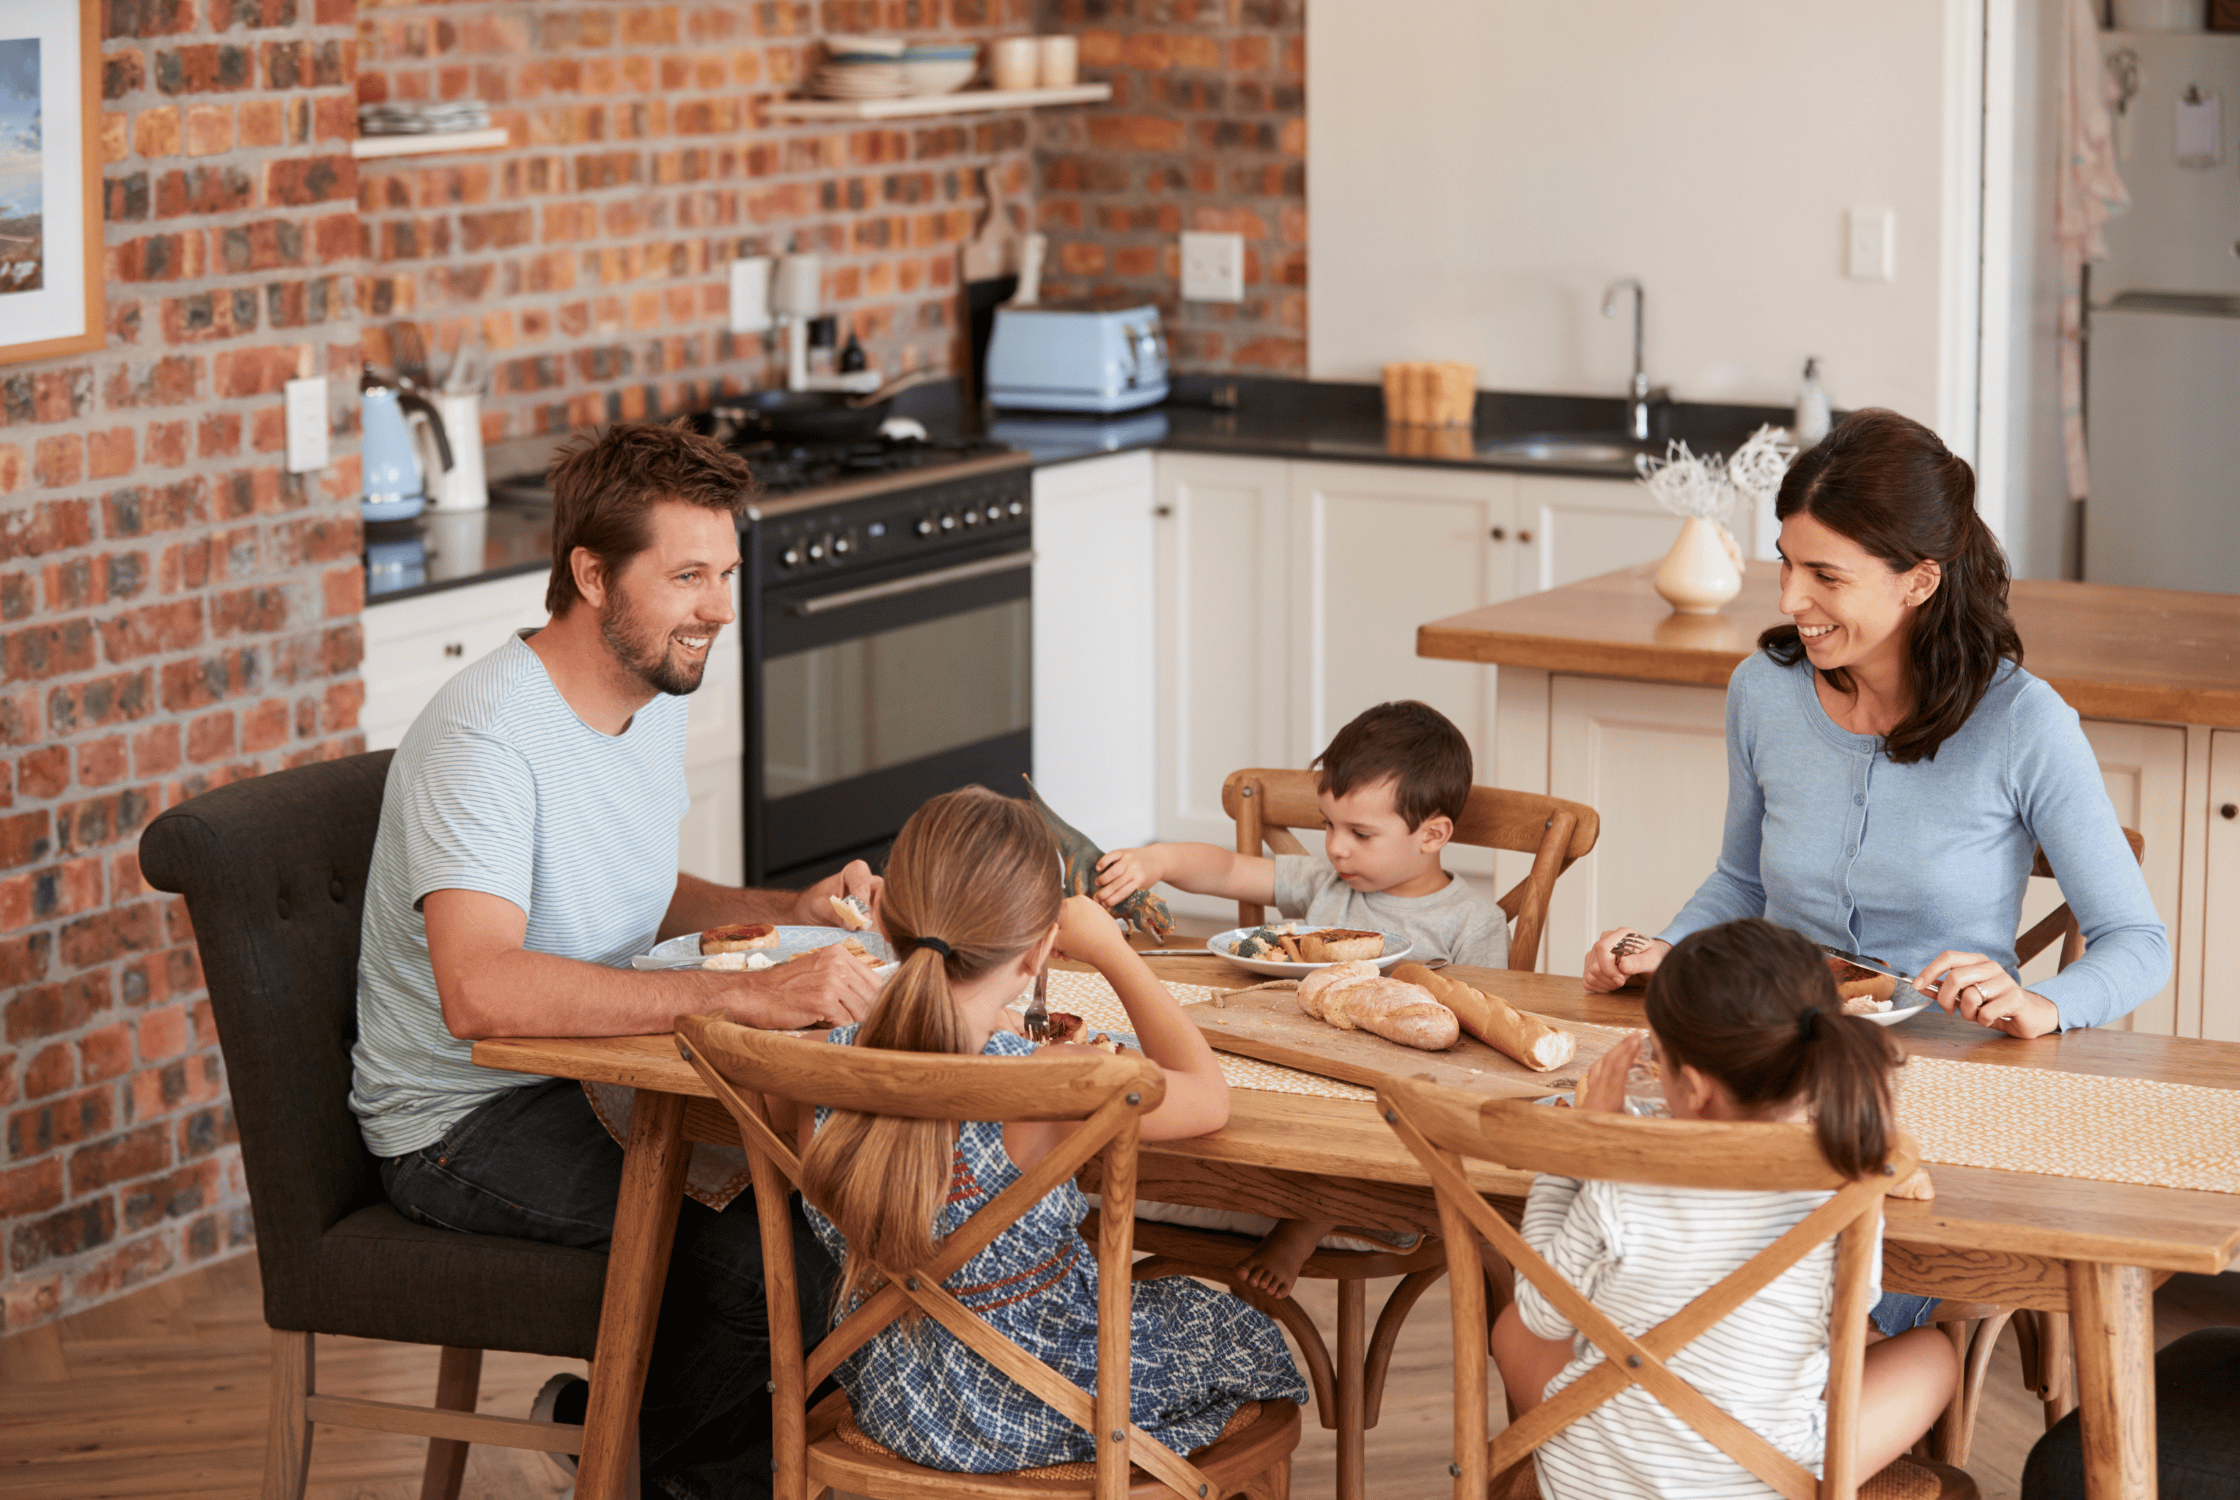 Eating family meals together with young children